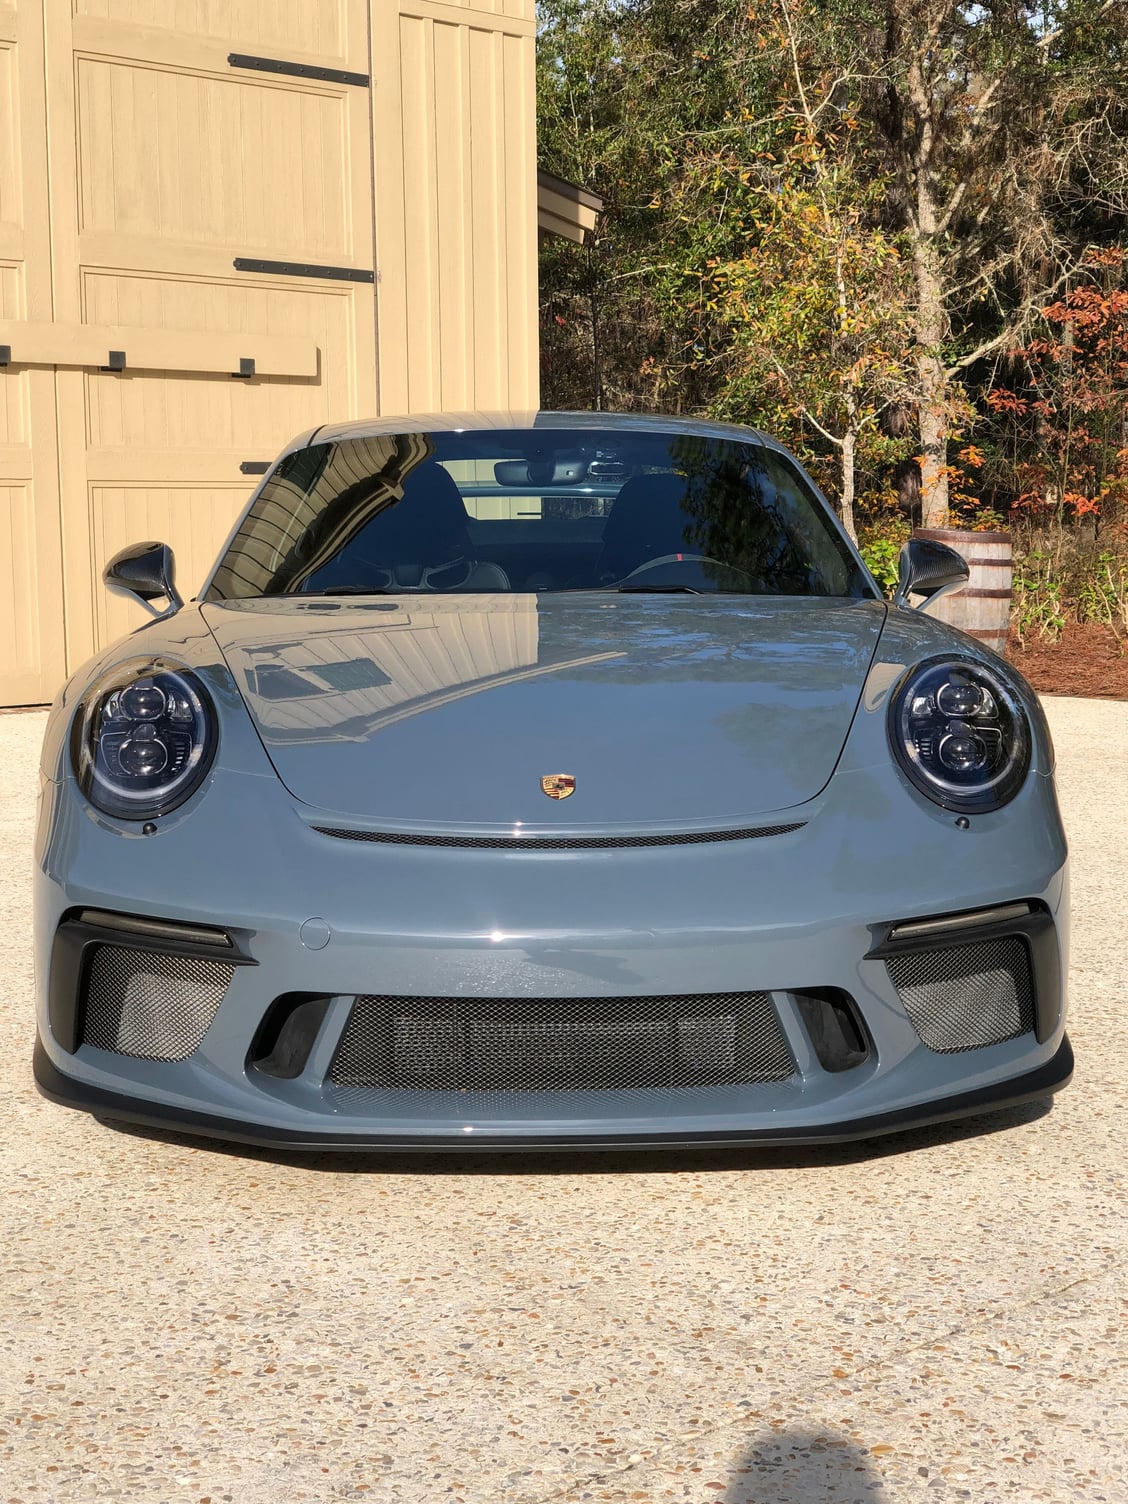 2018 Porsche GT3 - 2018 GT3...311 Miles...Graphite Blue...Well Equipped - Used - VIN WP0AC2A96JS174360 - 311 Miles - 6 cyl - 2WD - Automatic - Coupe - Blue - Jacksonville, FL 32224, United States